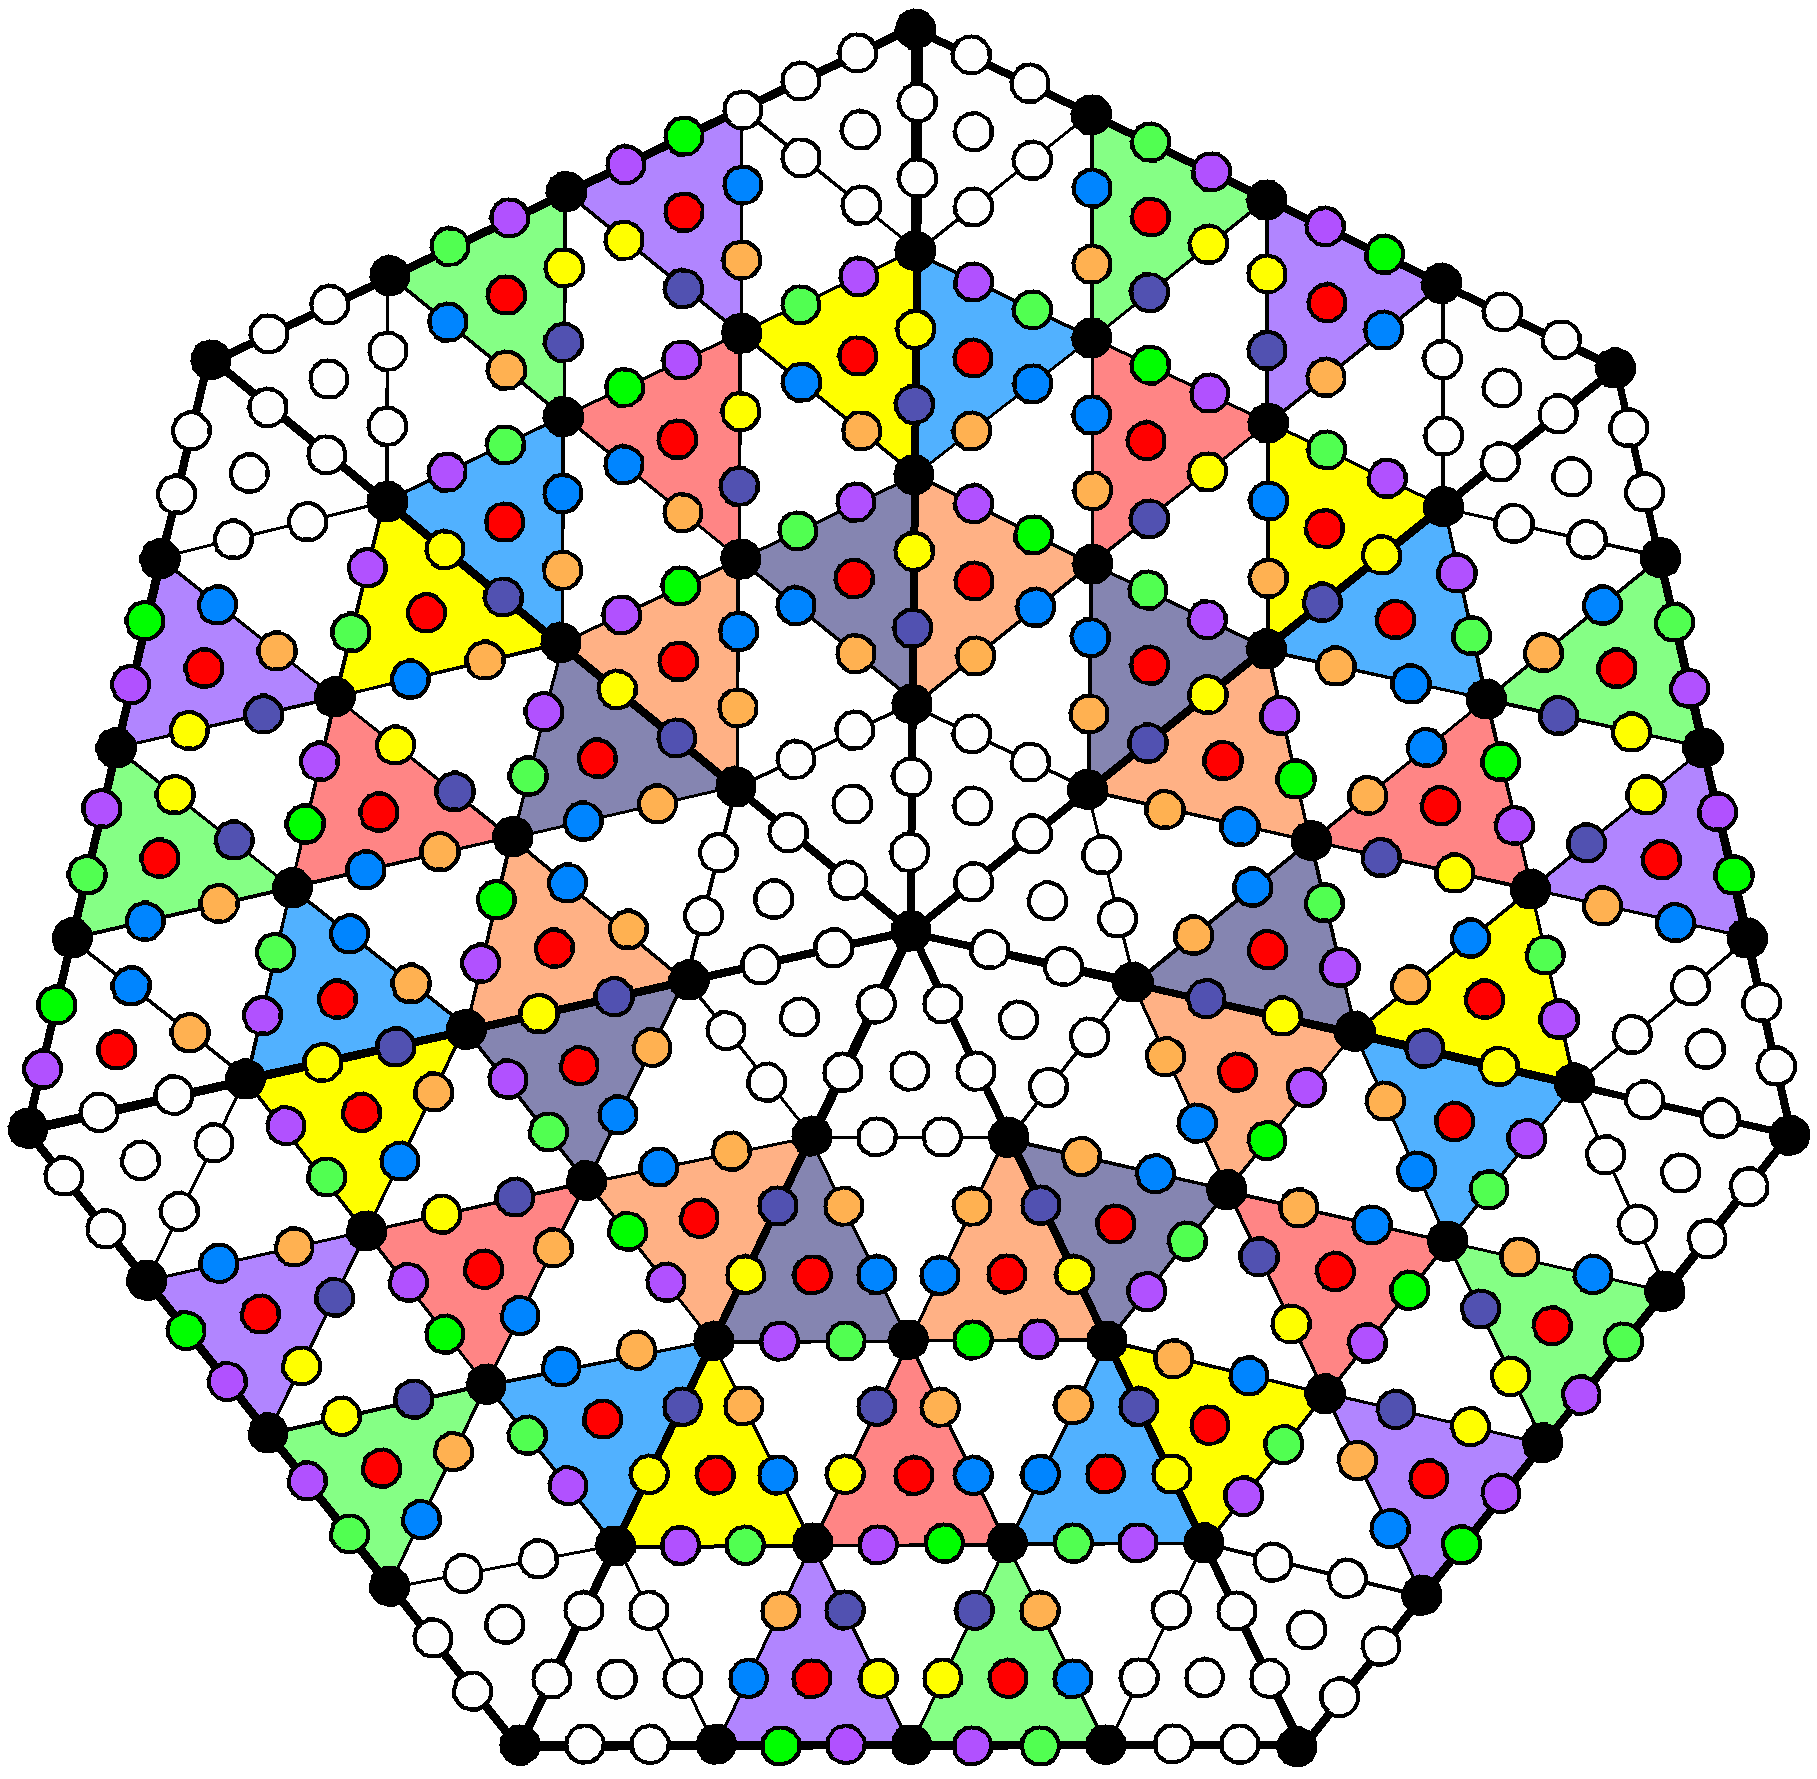 504 yods surround centre of heptagon